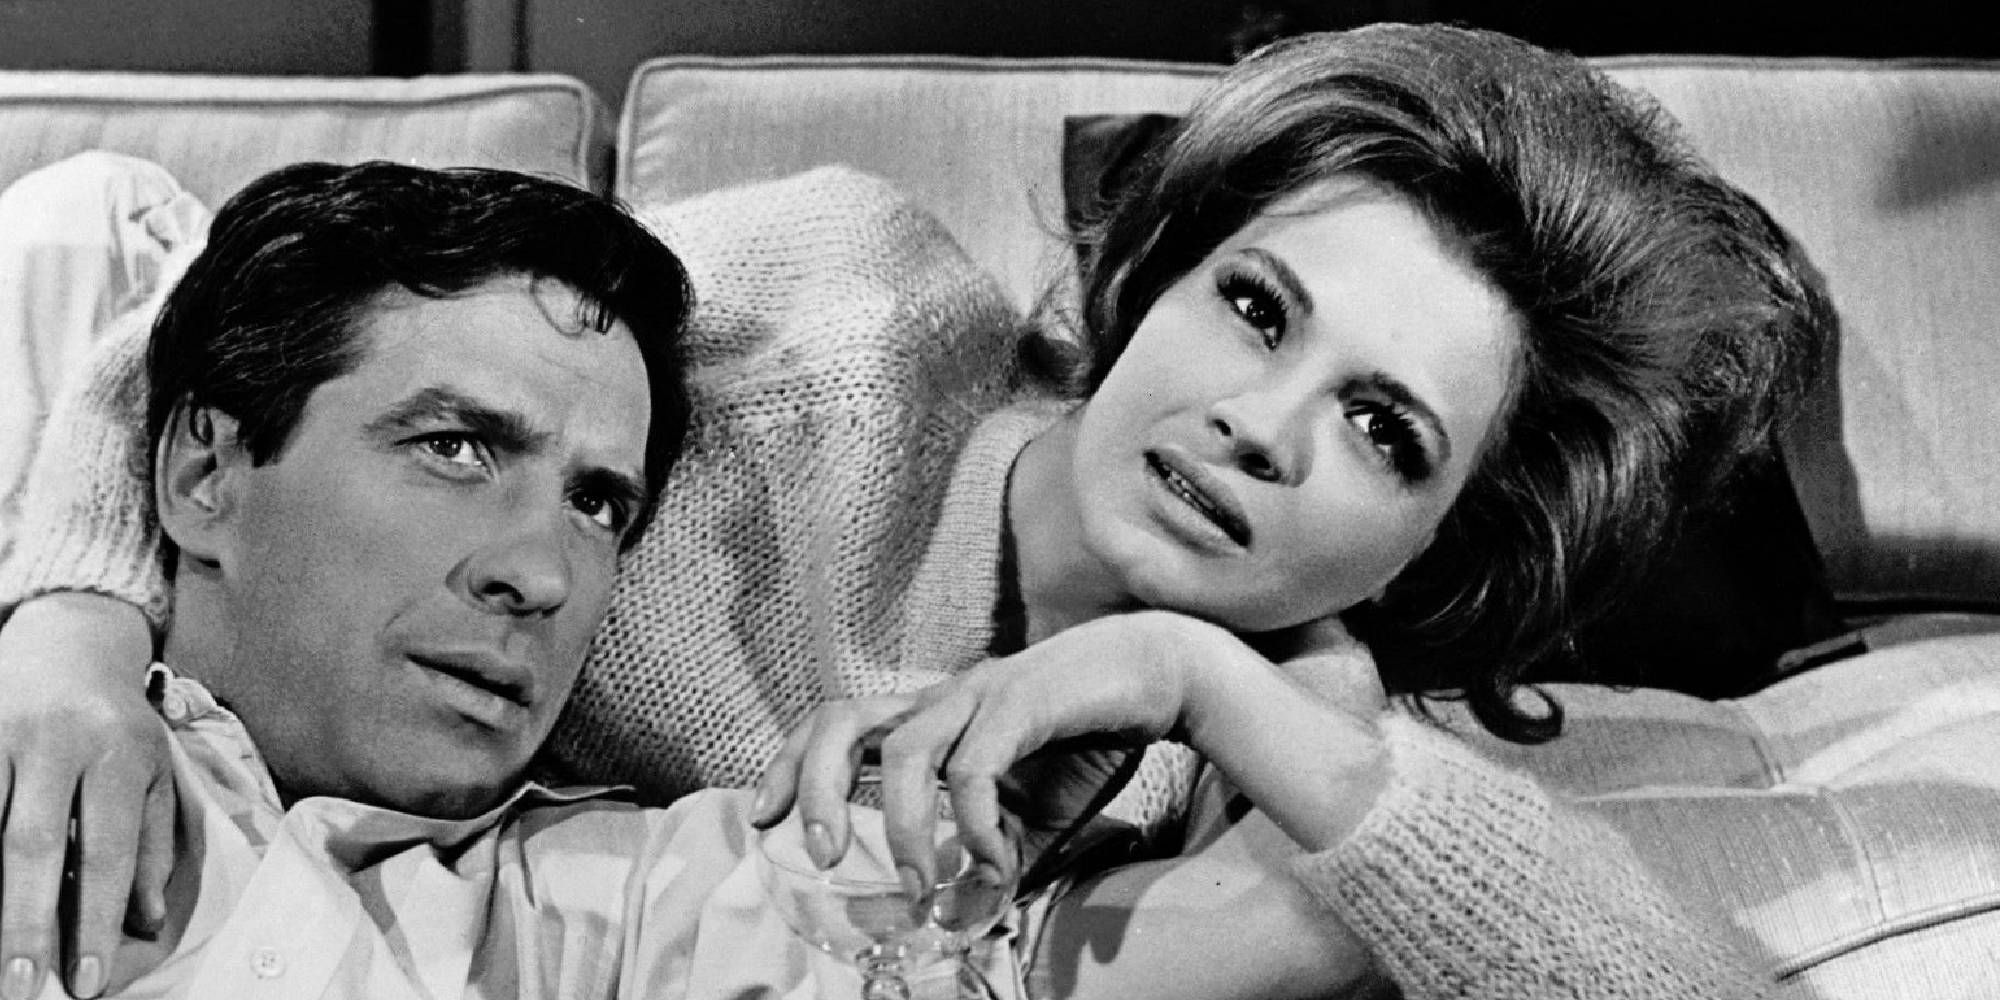 John Cassavetes and Angie Dickinson on the sofa in The Killers